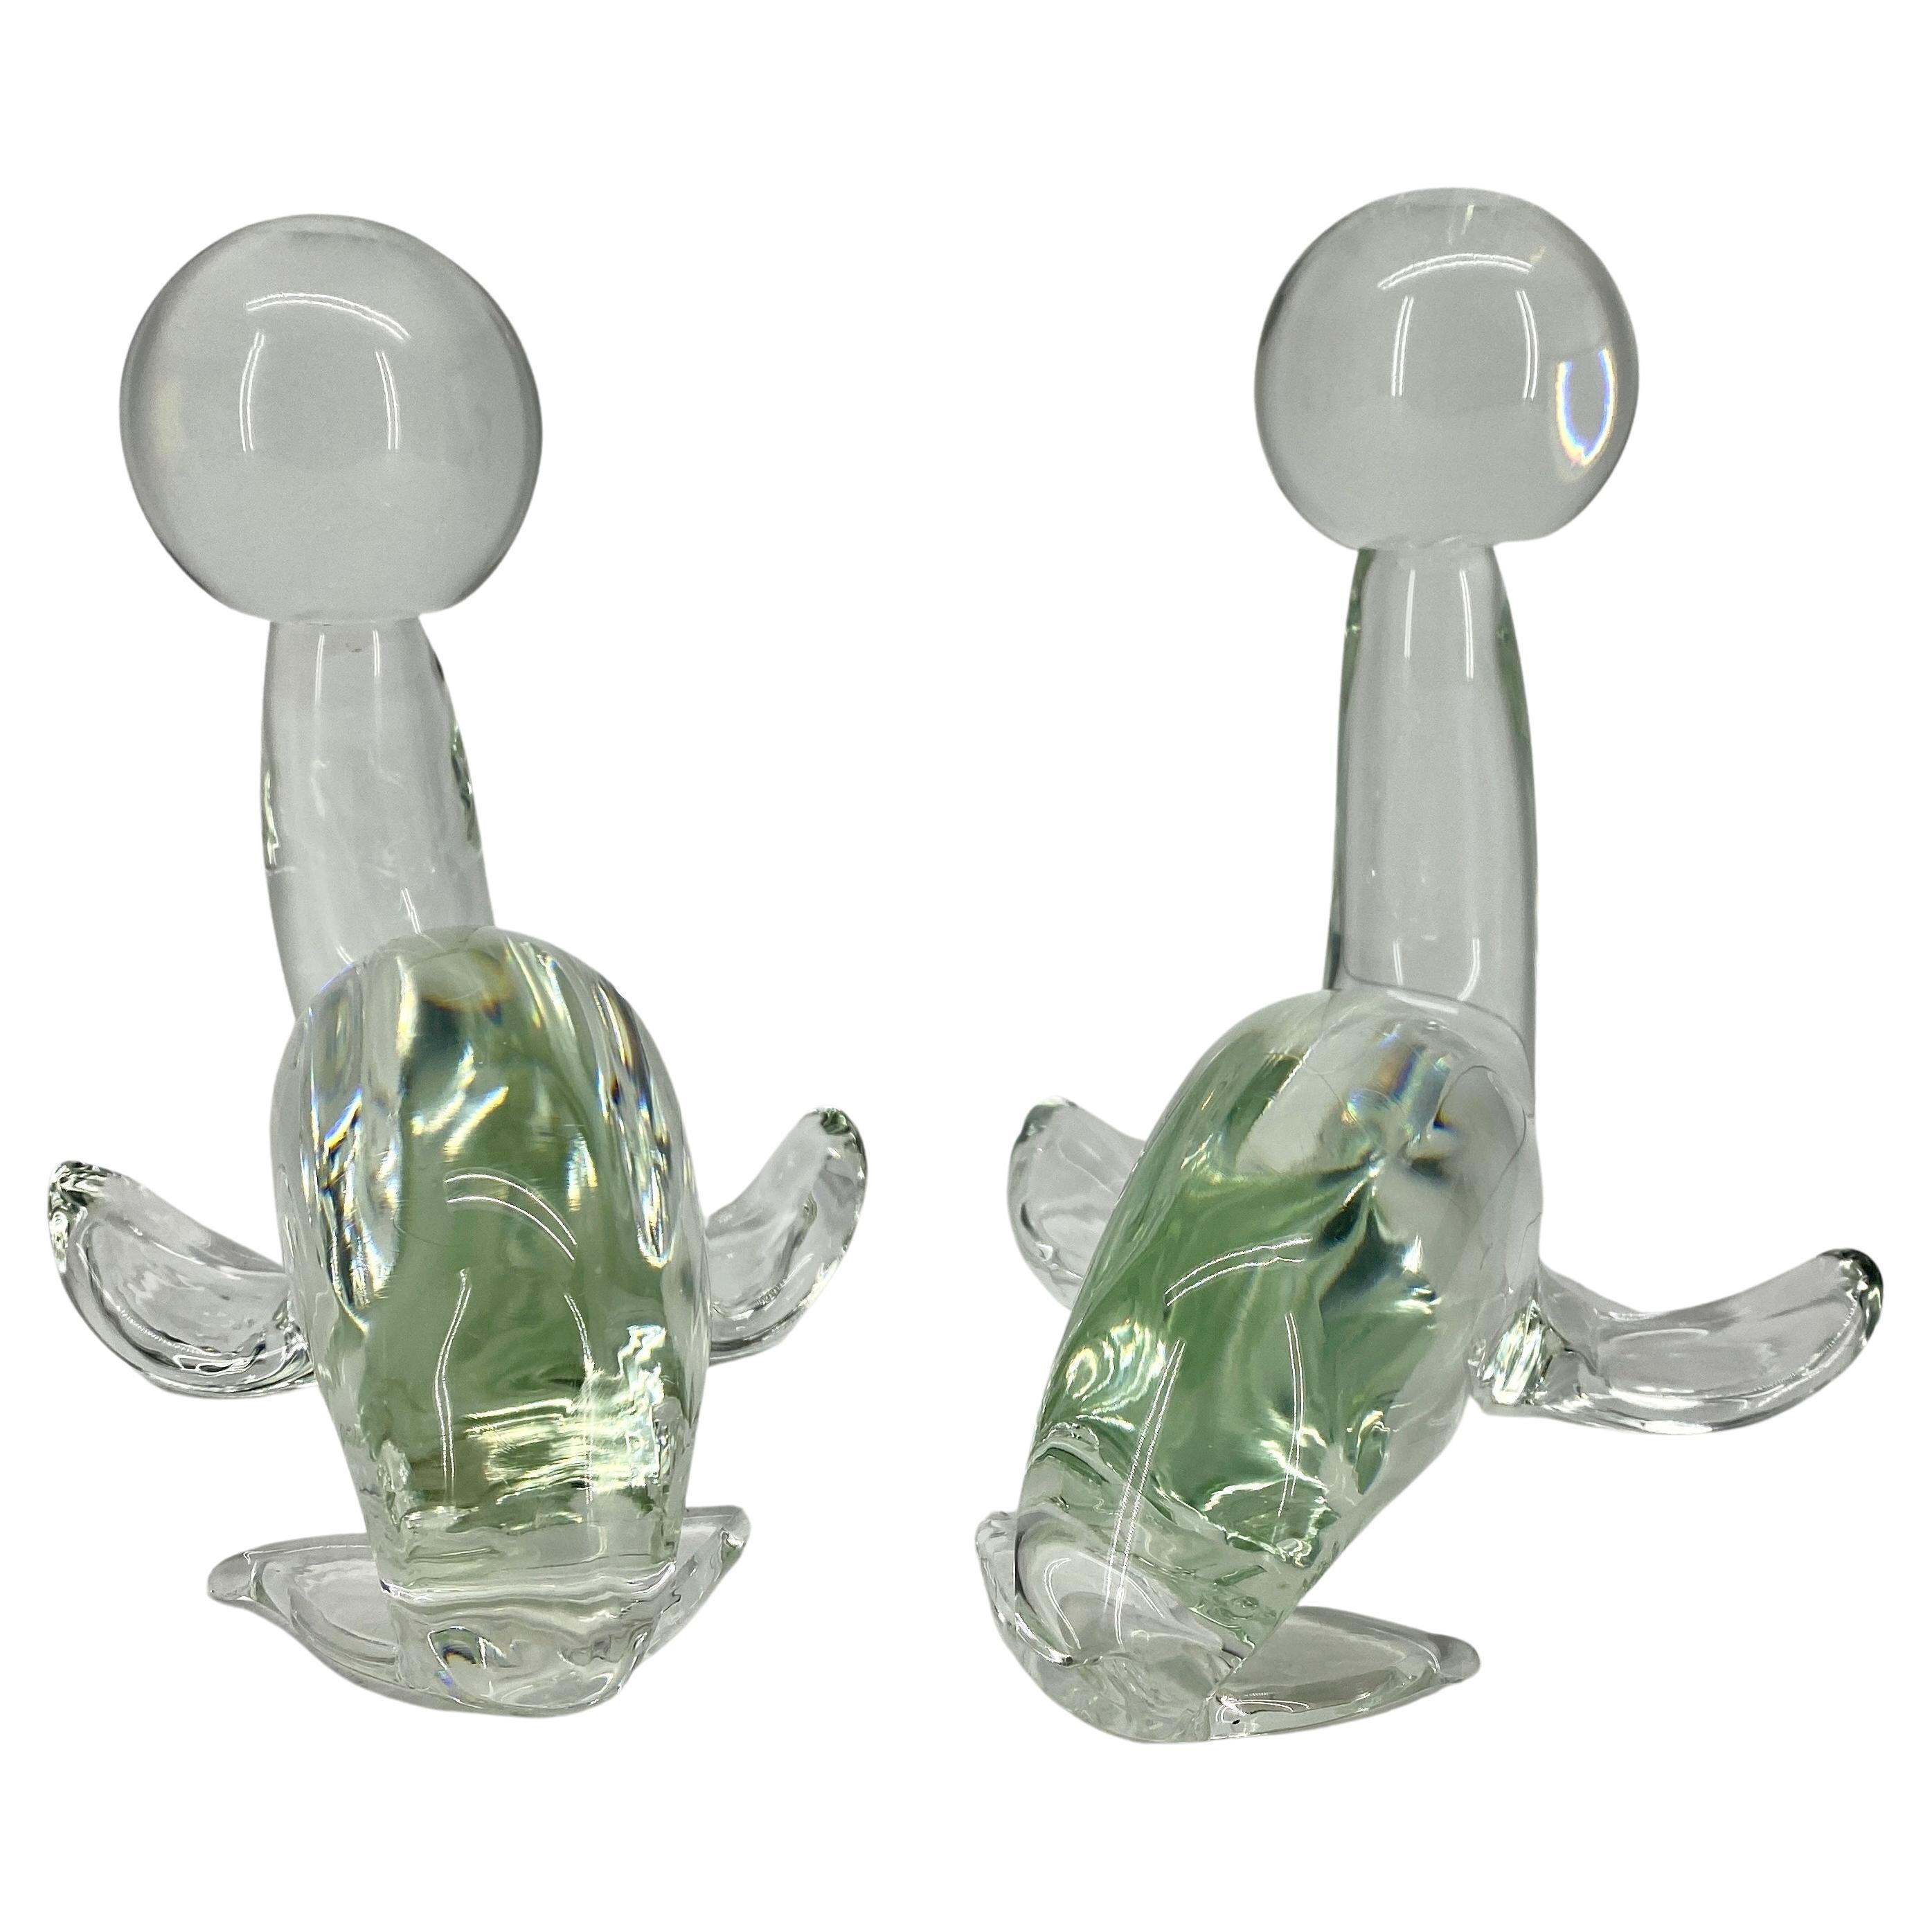 Pair of large heavy hand-blown clear Murano glass seal sculptures by Licio Zanetti.
In 1956 Zanetti Vetreria Artistica was founded by the Glass Master Oscar Zanetti and his son Licio. Licio Zanetti is world renowned for his Murano glass sculptures.